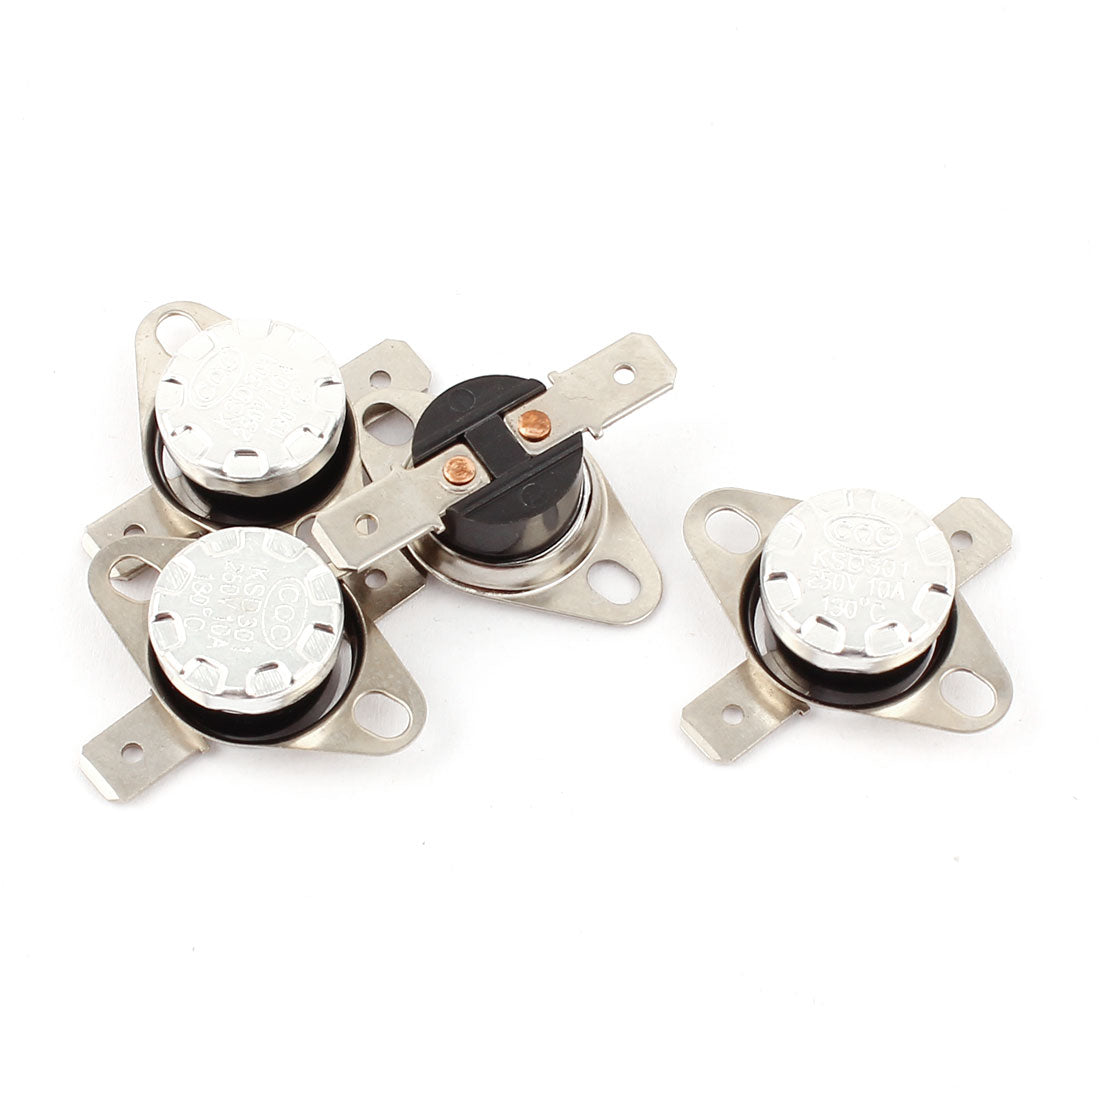 uxcell Uxcell 4PCS KSD301 130C 266F NC Thermostat Temperature Thermal Control Switch